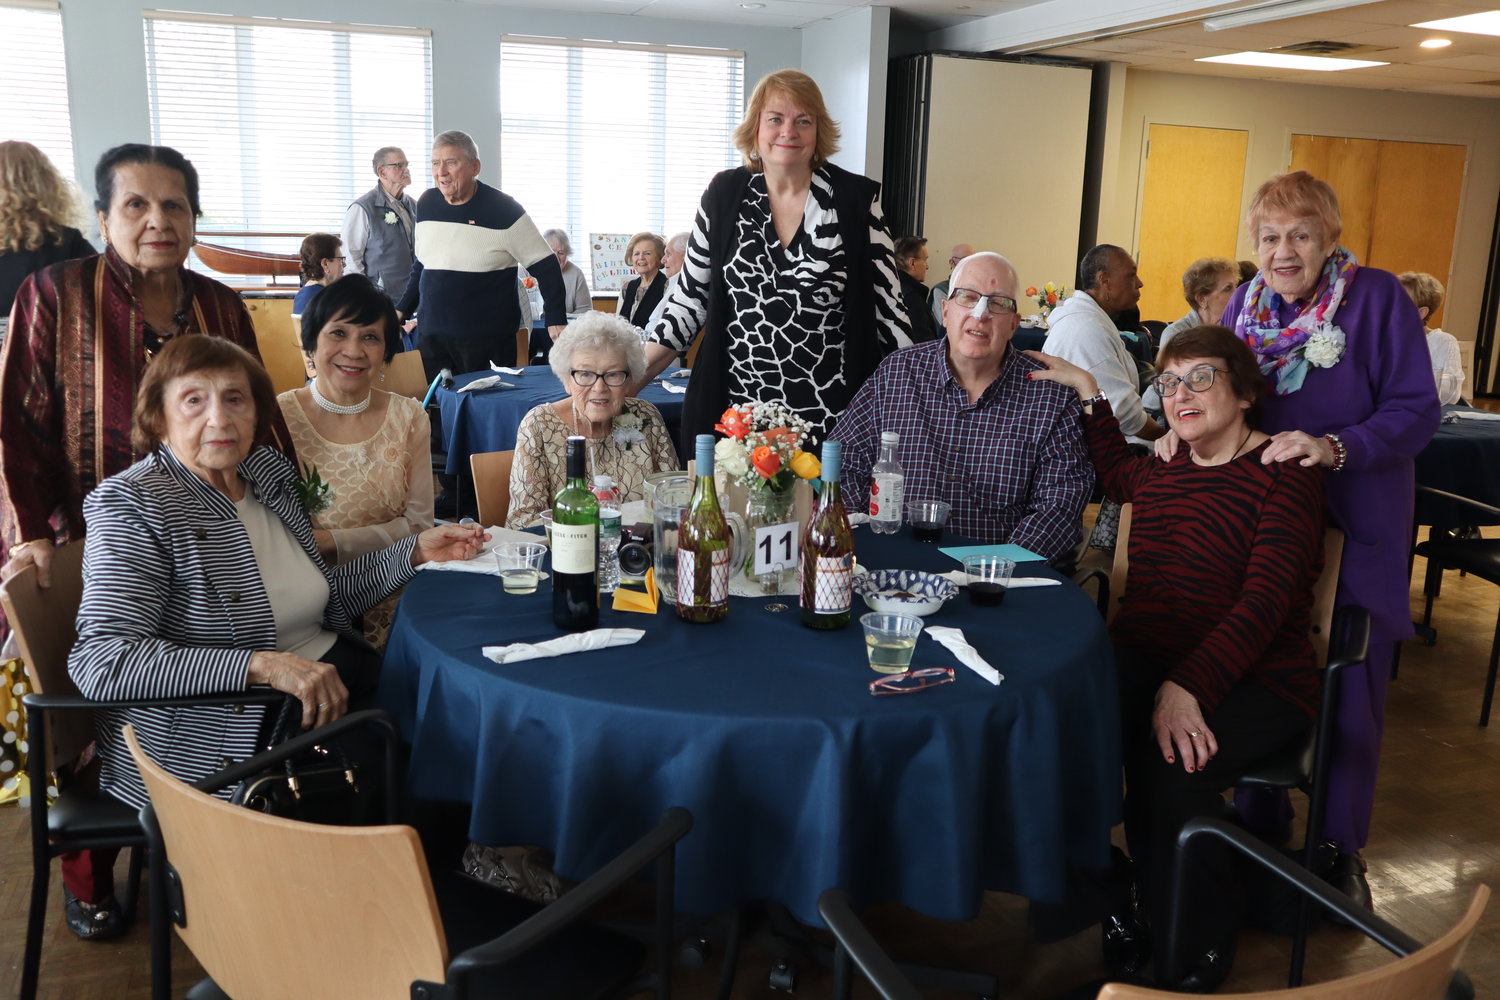 The Sandel Senior Center, in Rockville Centre, held a celebration for 47 people who will turn 90 or older this year.